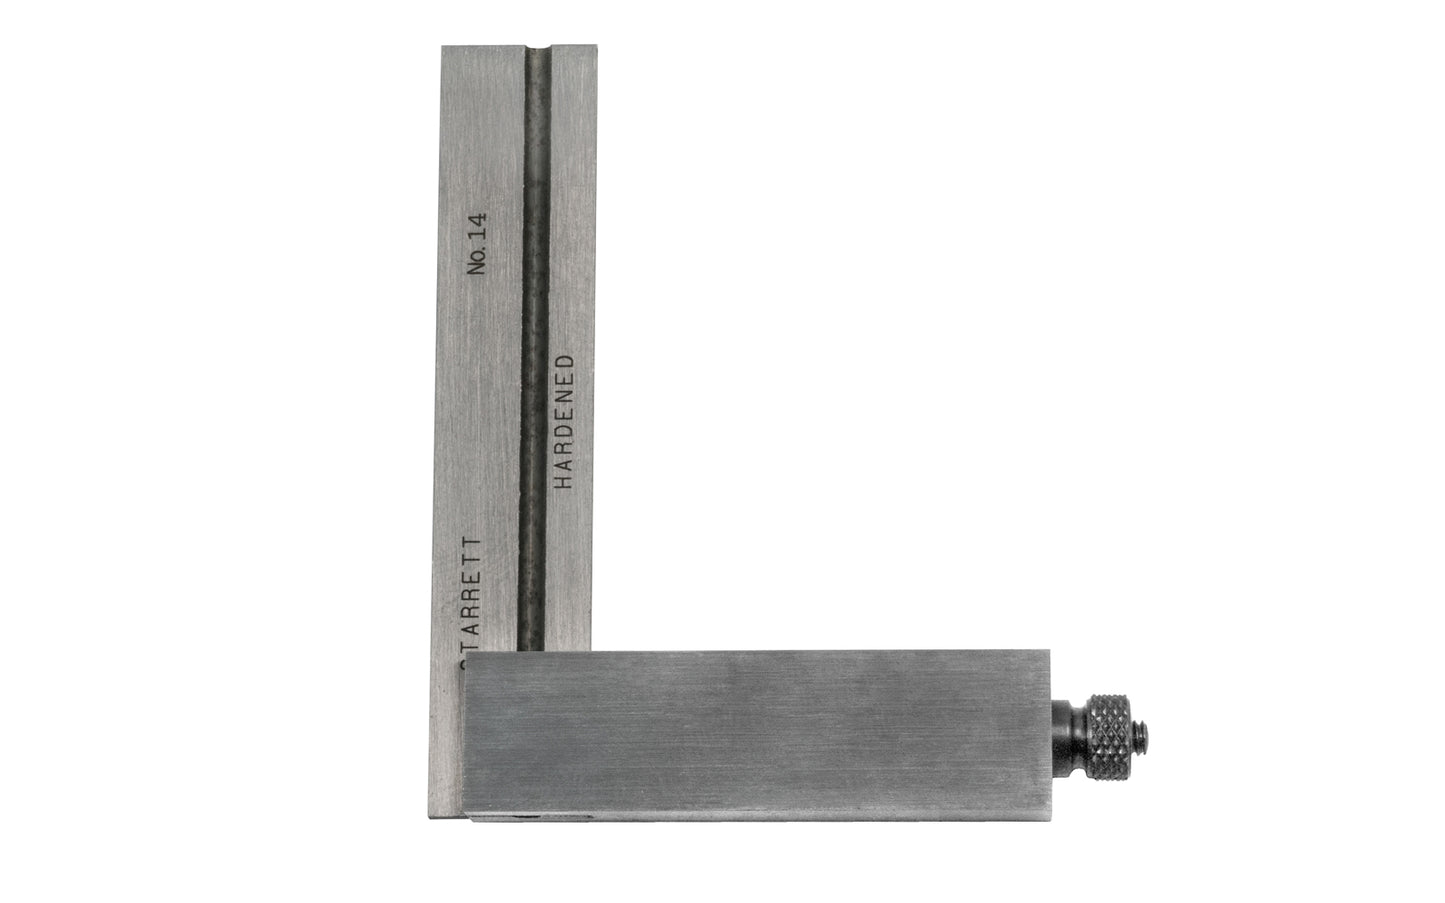 Starrett 2-1/2" Double Steel Square 14D. Double Square with 3 Blades. 1/32" & 1/64" grads. Bevel Blade 30 degree & 60 degree angles. Made in USA.